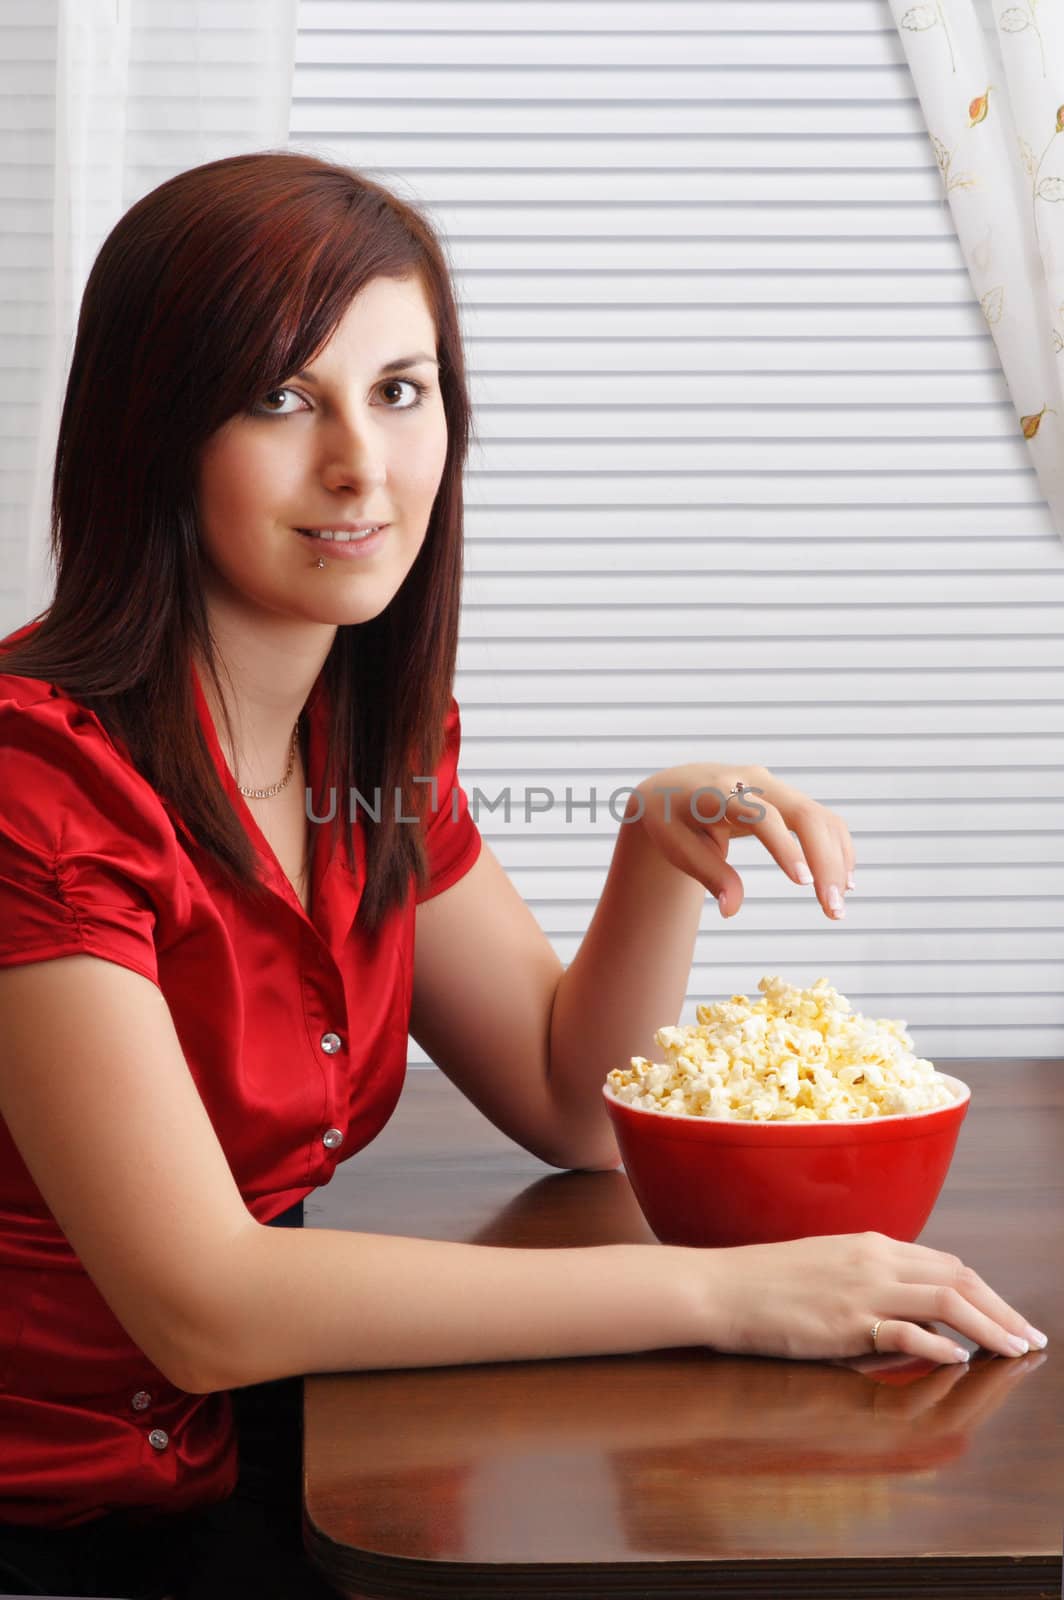 young woman at table, with popcorn in a red bowl